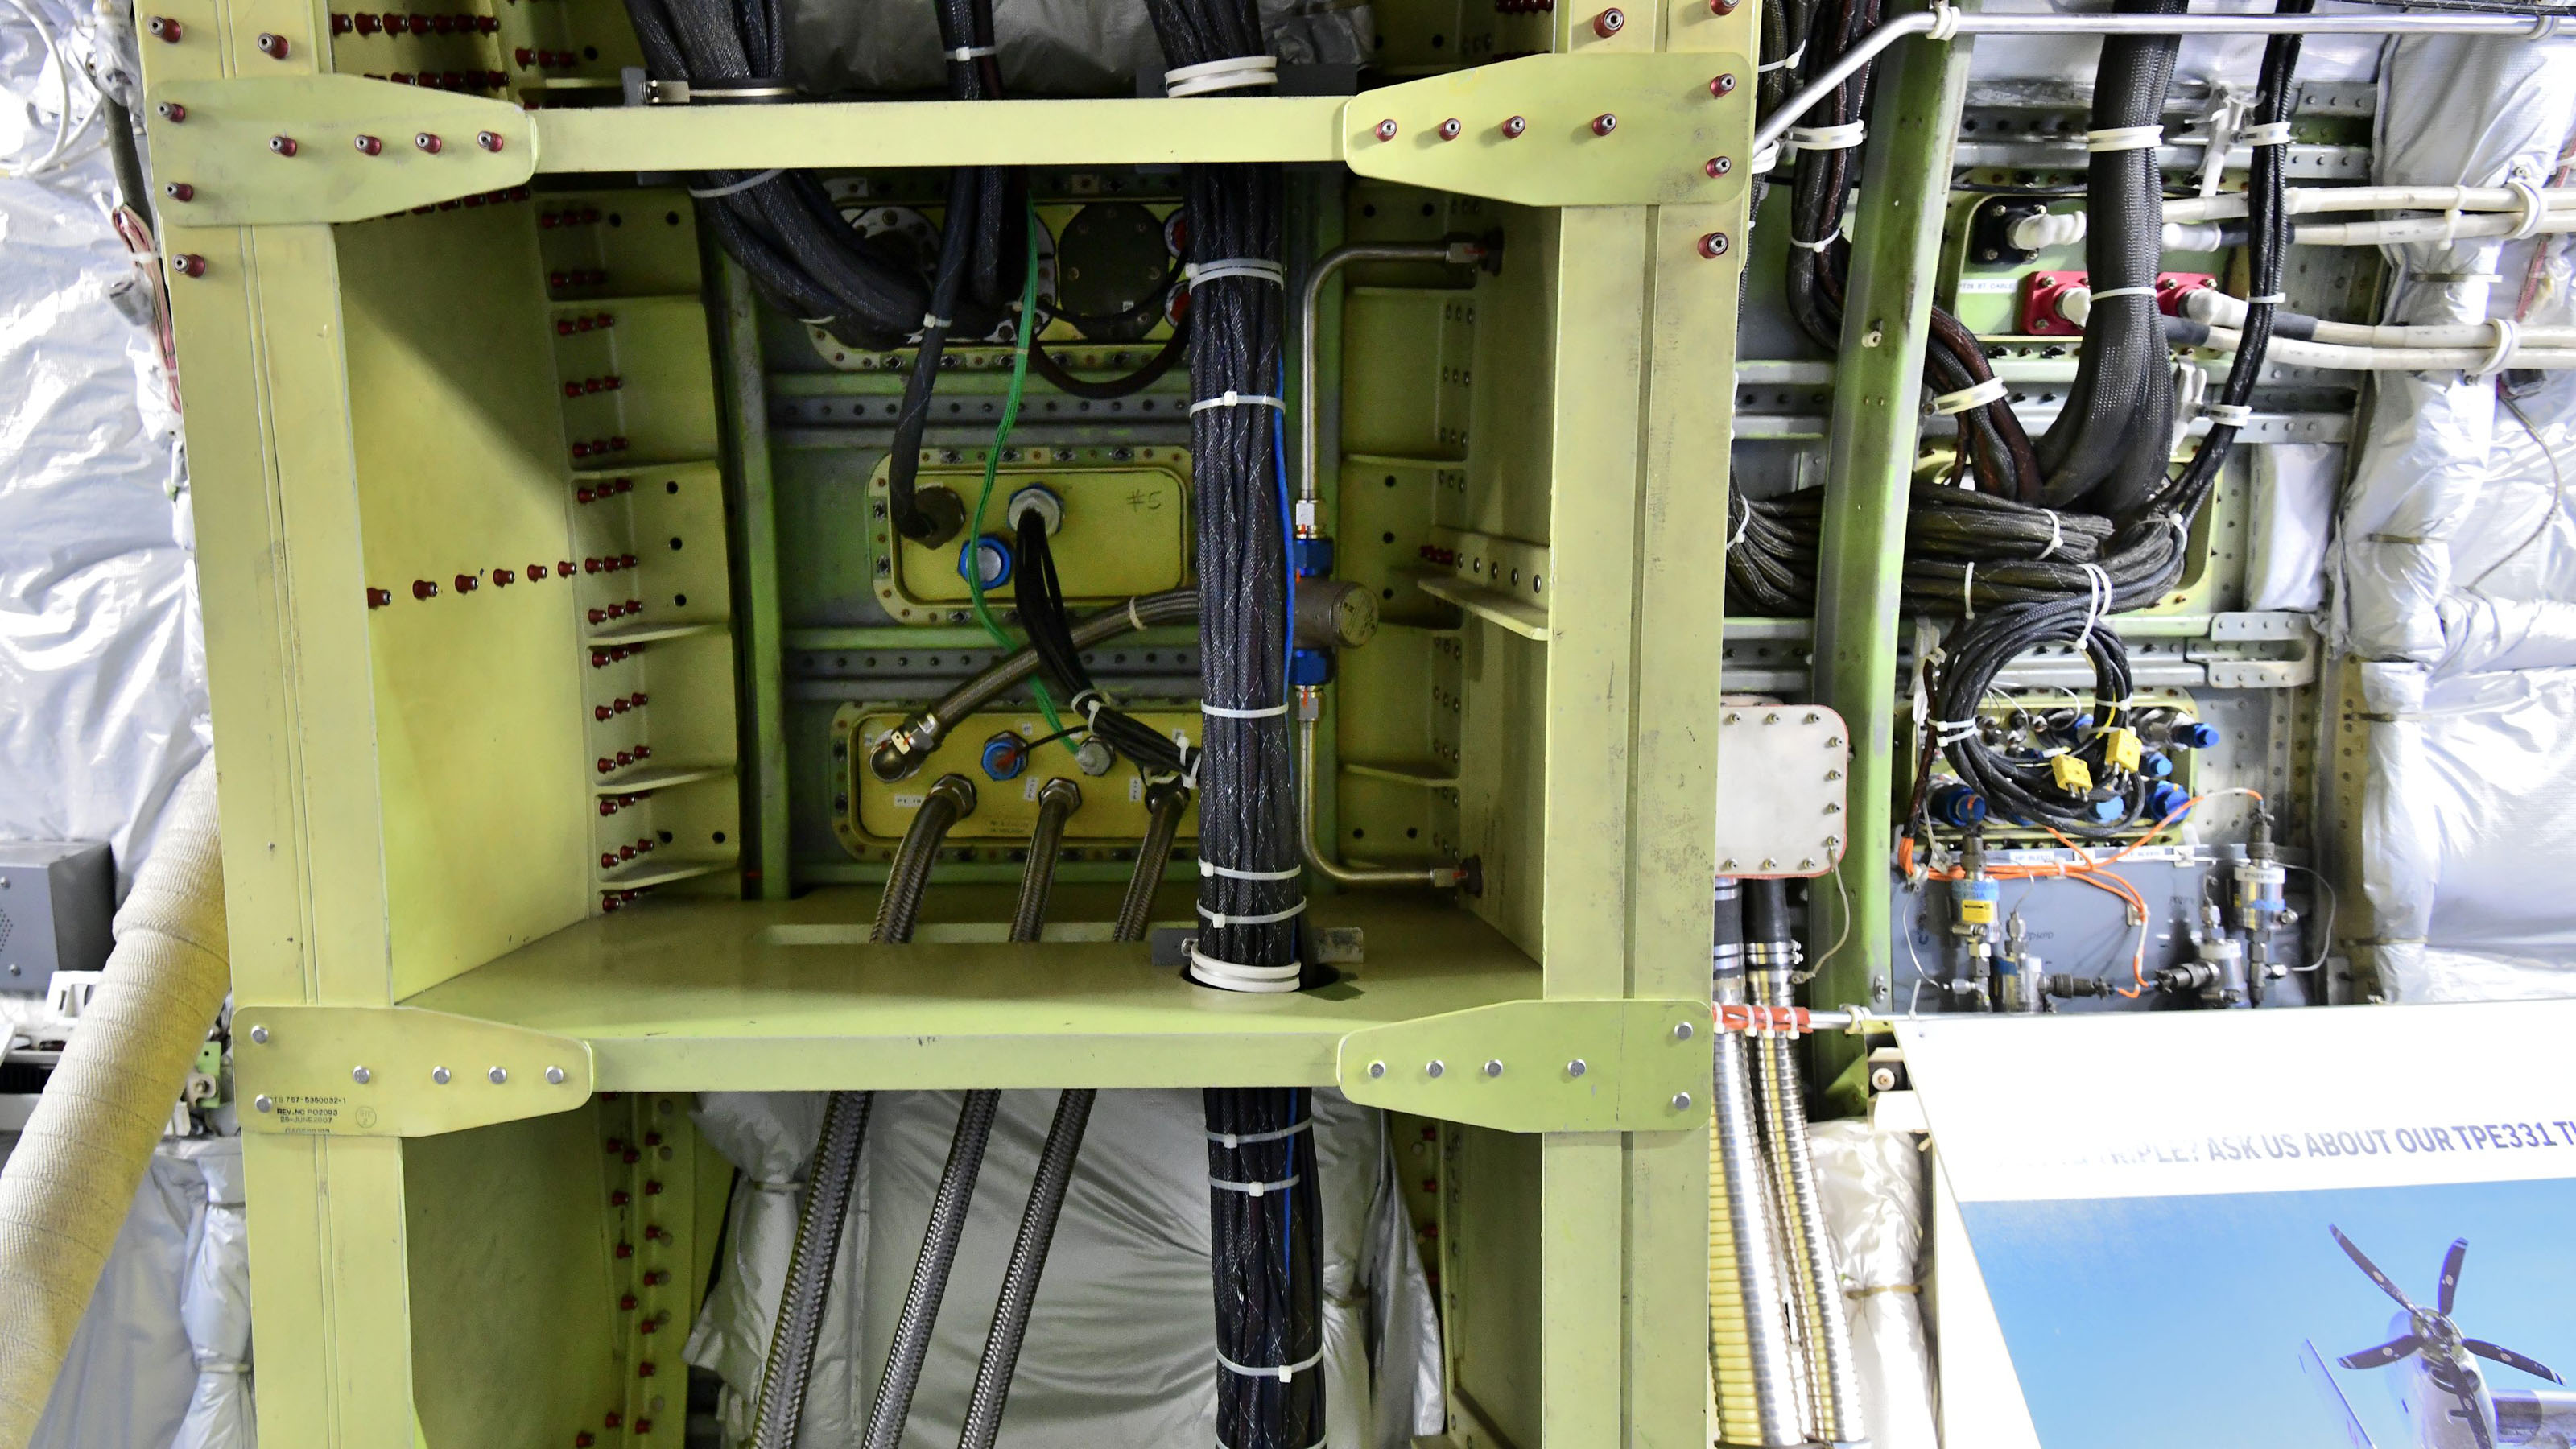 The green metal is additional structure added to Honeywell's Boeing 737 test bed to support the test engine. Inside and to the right are passthroughs for fuel, bleed air, and data feeds. Photo by Mike Collins.